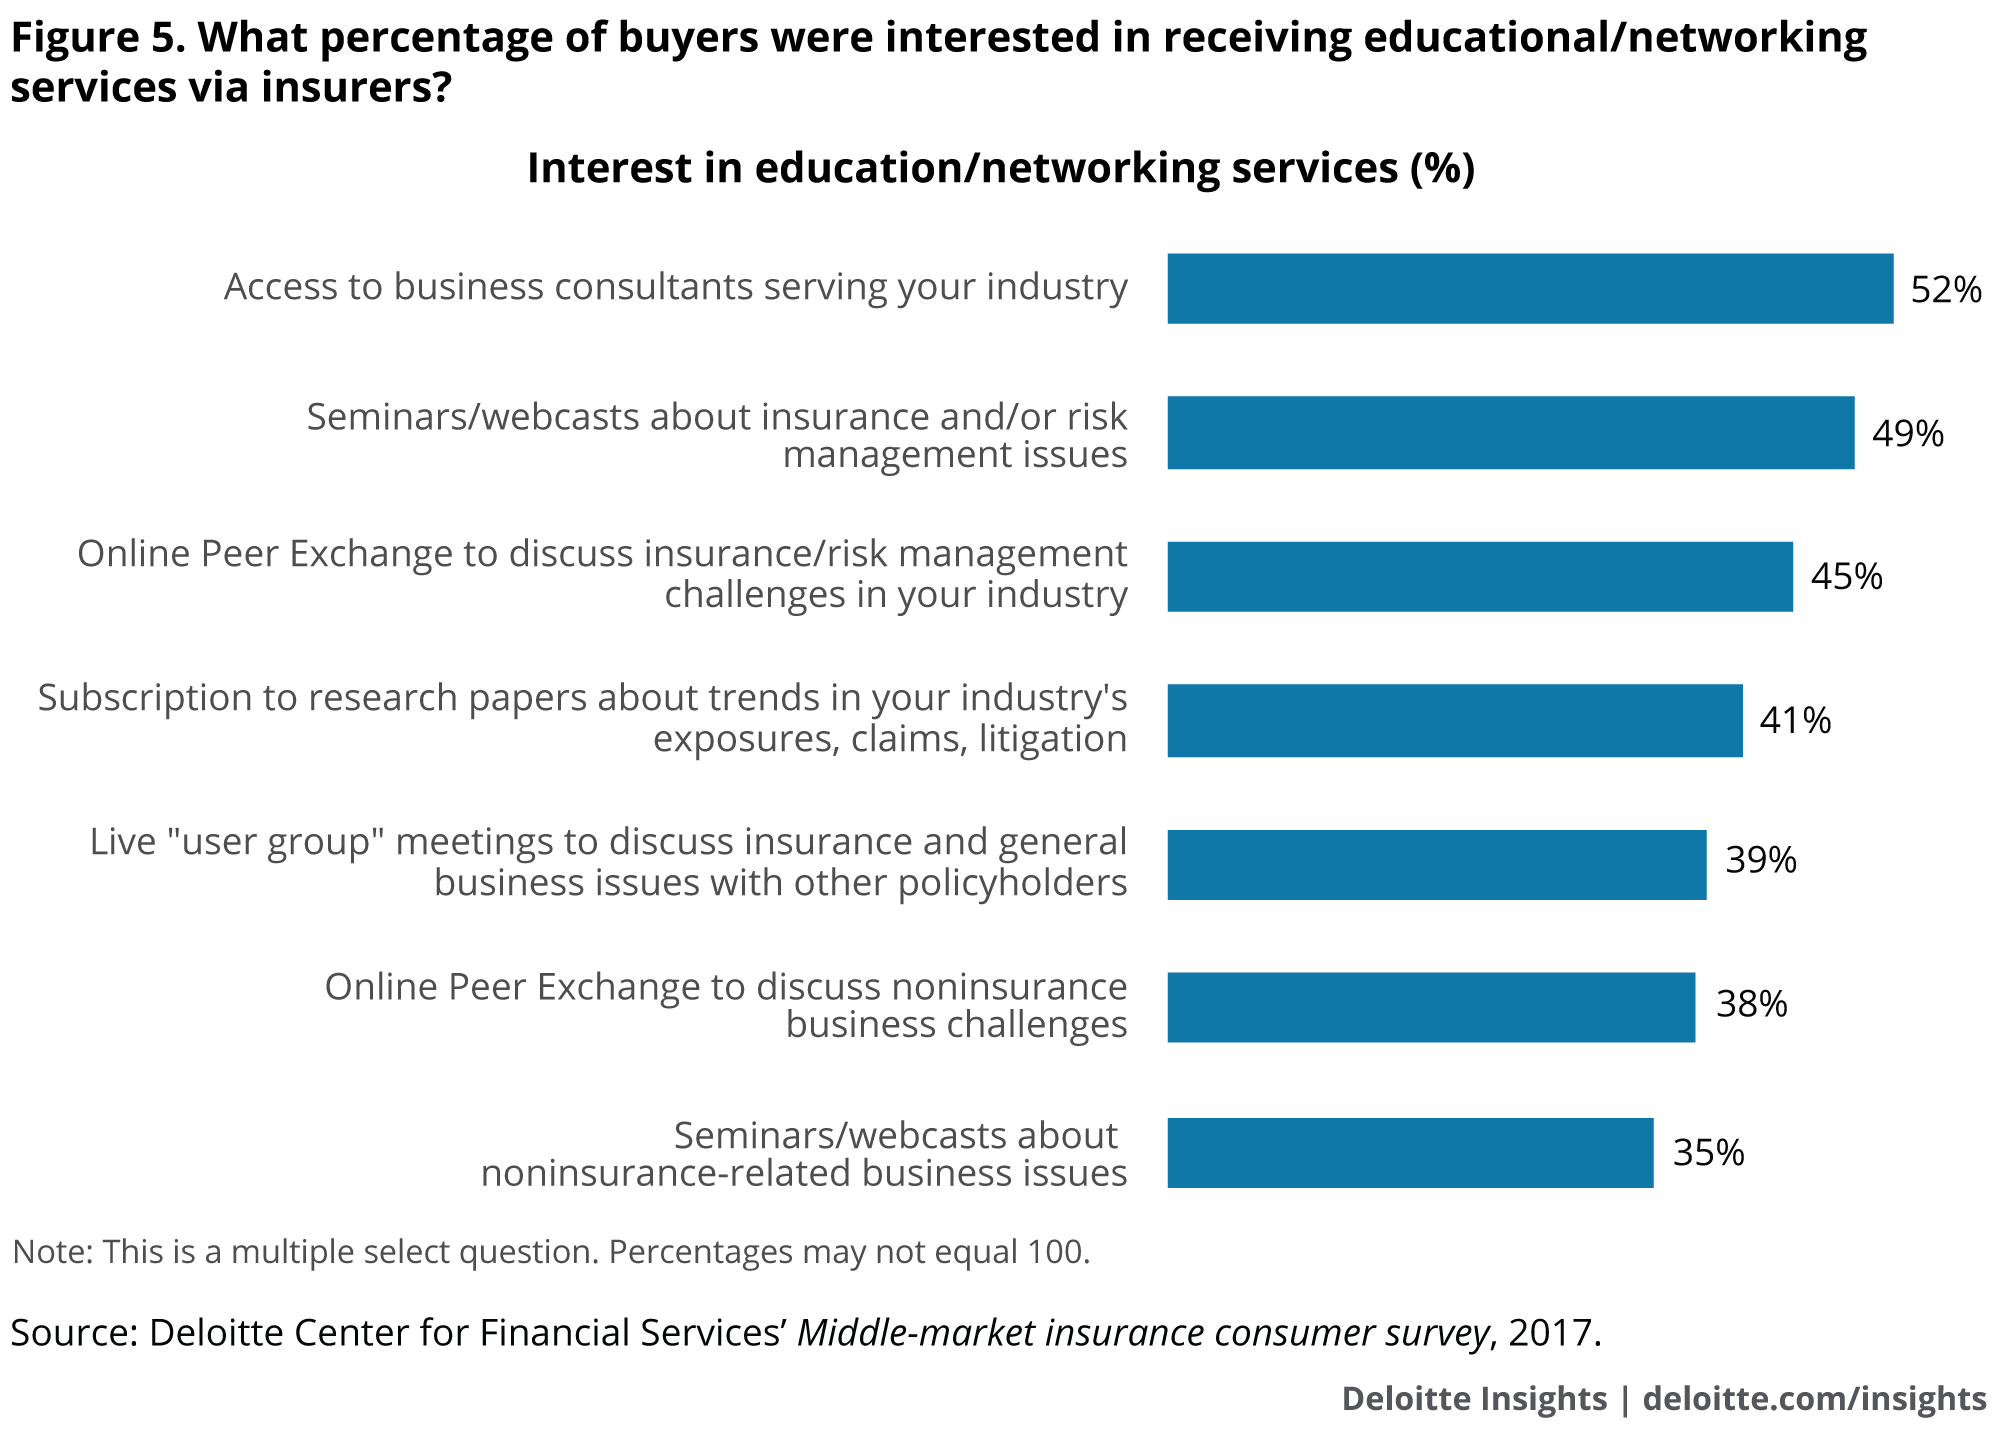 What percentage of buyers were interested in receiving educational/networking services via insurers?